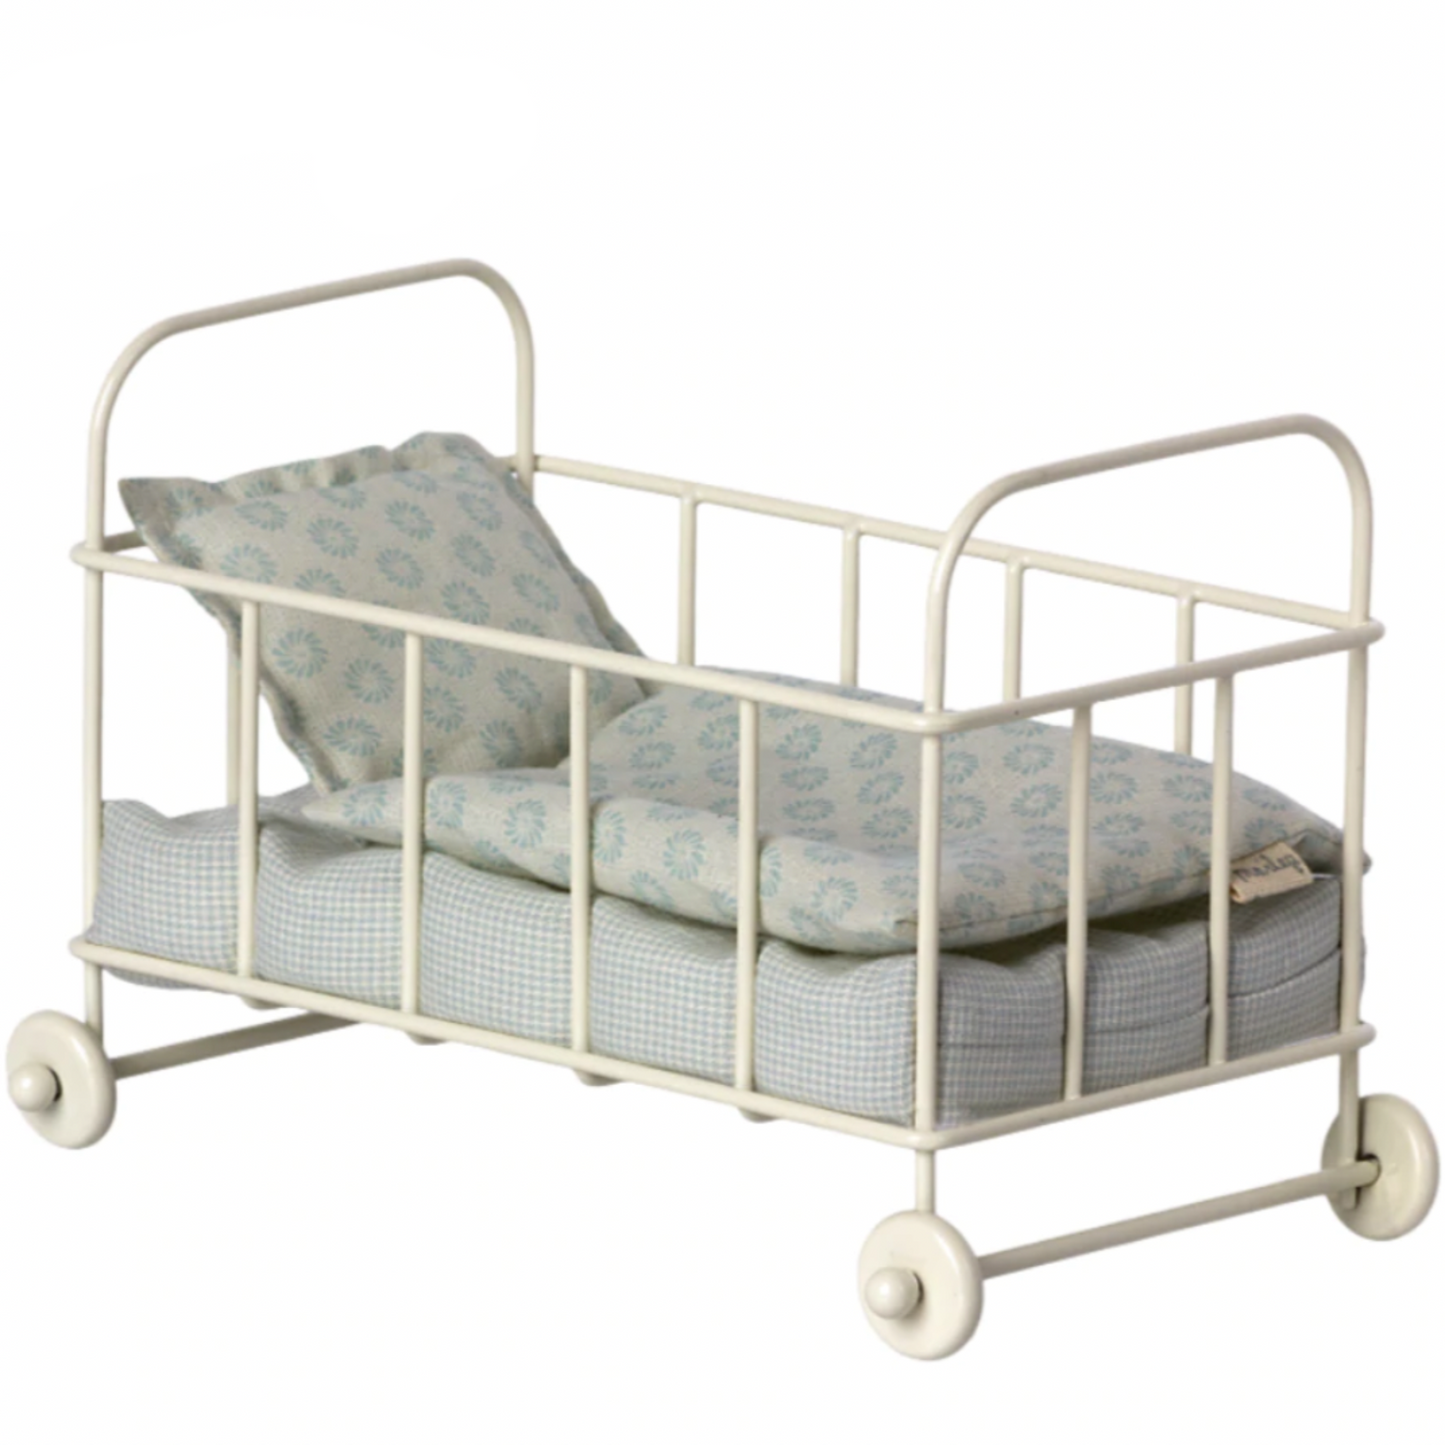 MAILEG Cot Bed Micro, Blue (6748652798017)